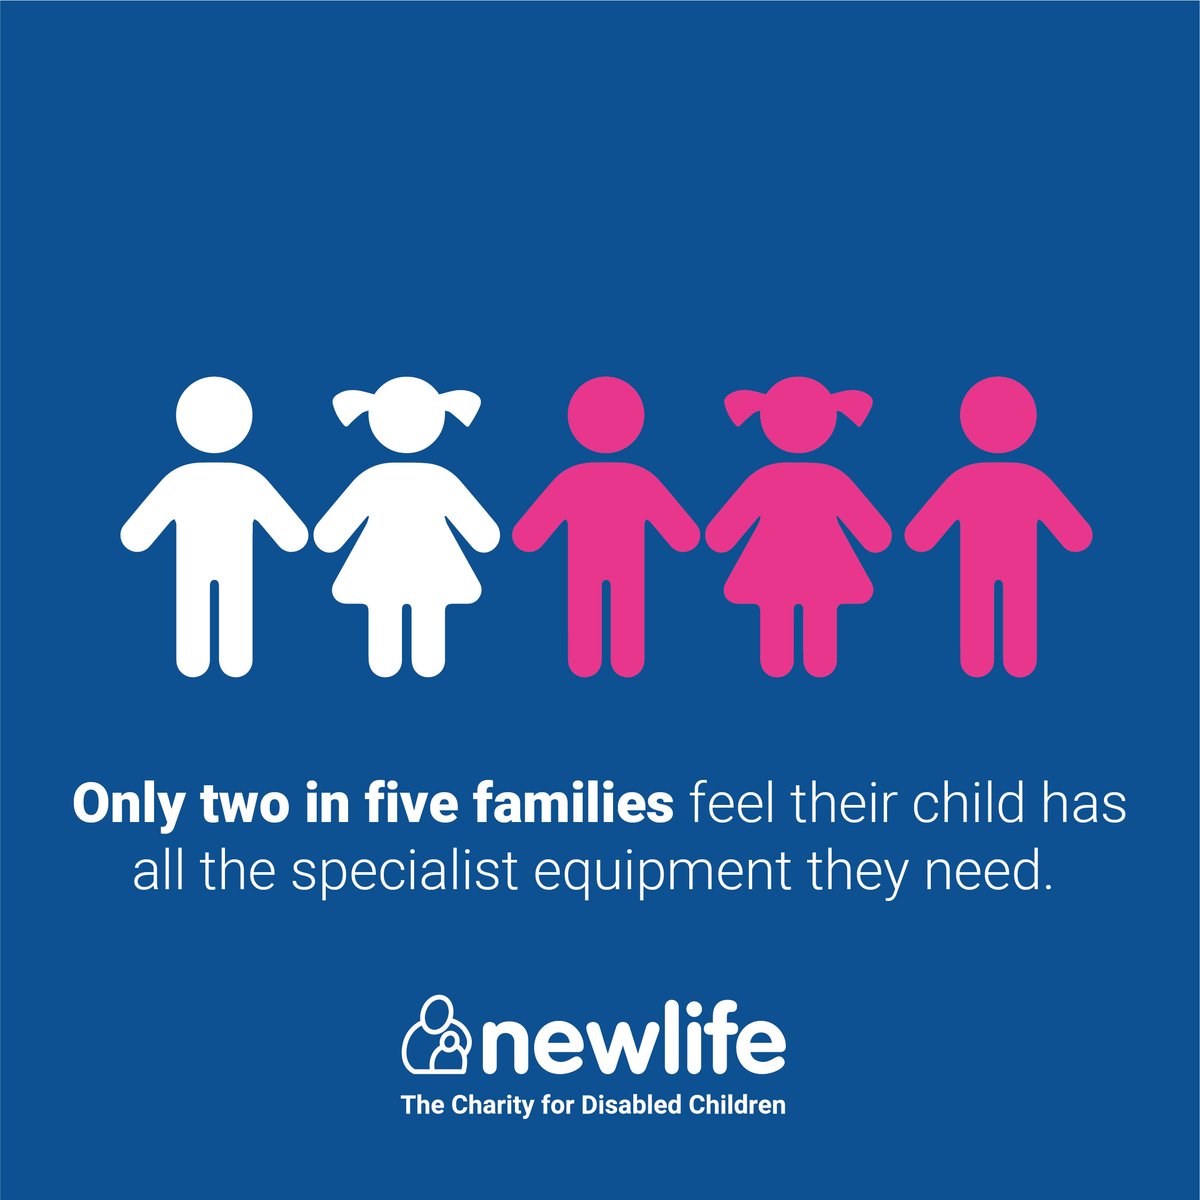 We’re pleased to share @newlifecharity’s new report, Fight For Our Future, which paints a bleak picture, revealing that only 2 in 5 families feel their child has all the equipment they need. We're urging our followers to read & share the report: newlife.support/fight-for-futu…